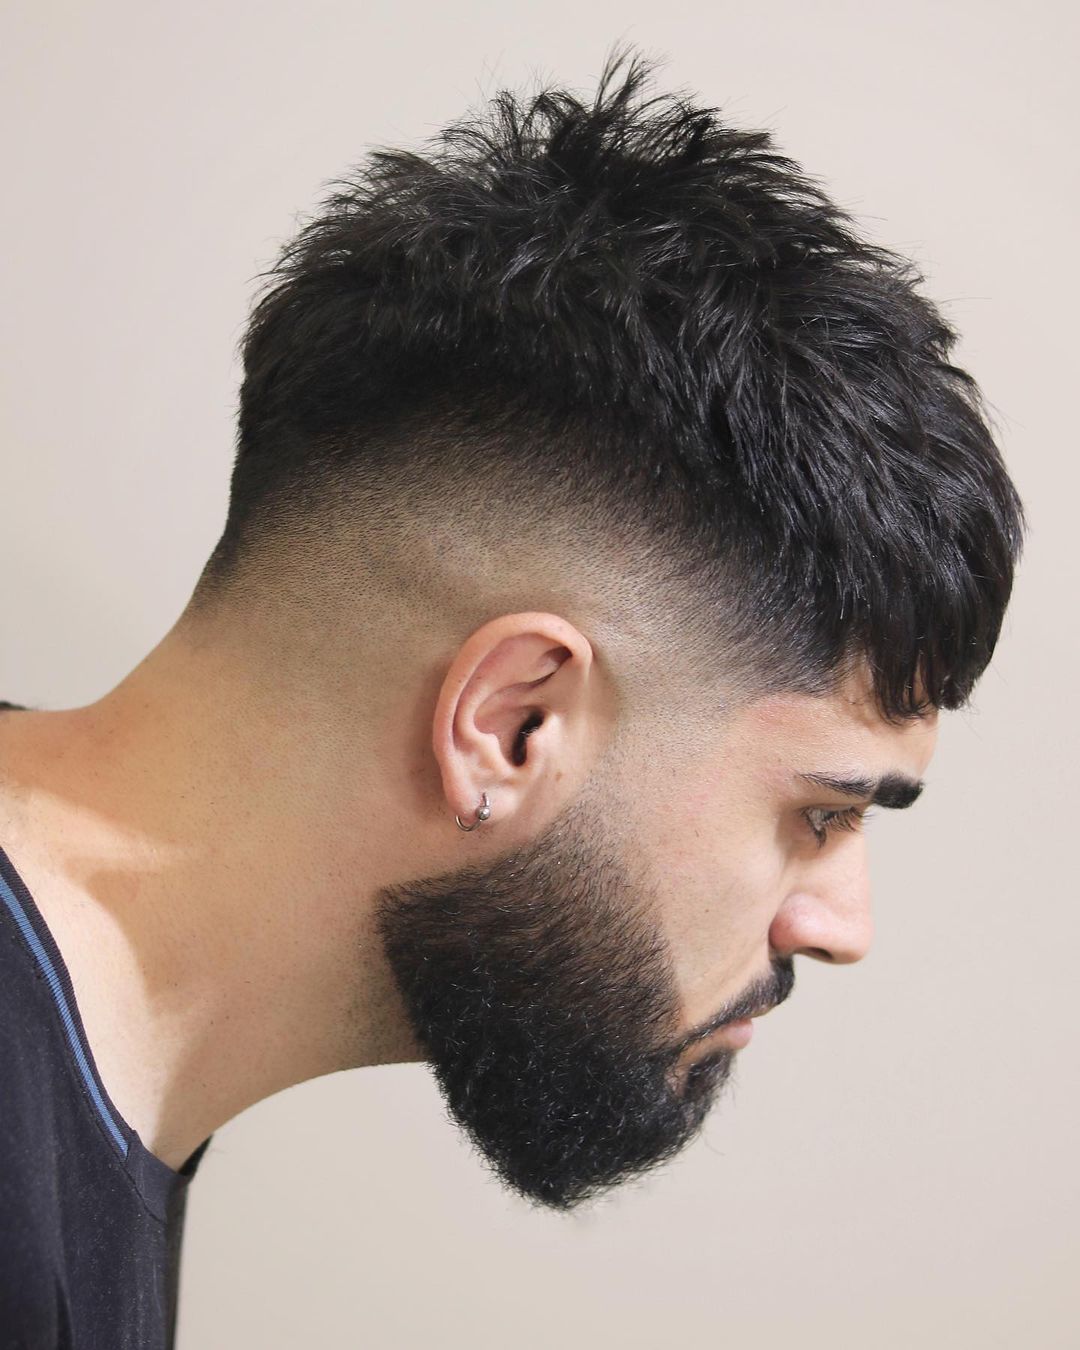  Men's Fade Haircuts for Short Hair - Cool Men's Hairstyles 2021